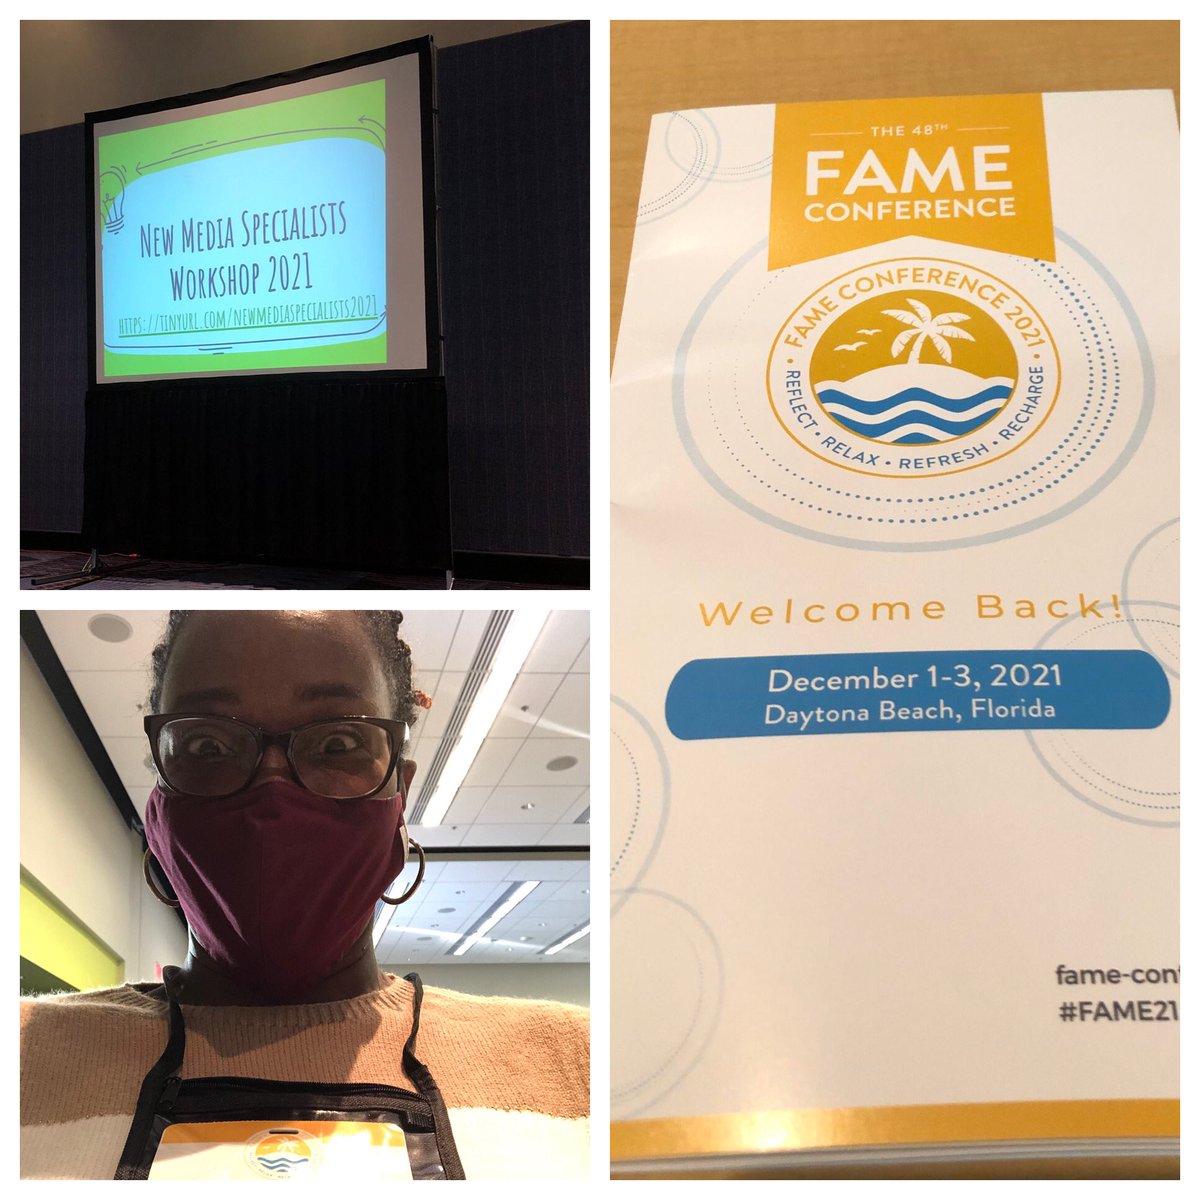 I can hardly contain my excitement for today. 😊🥰❤️ @hubofschool @TBASlighMiddle @FloridaMediaEd 

#teacherlibrarian #fameconference2021